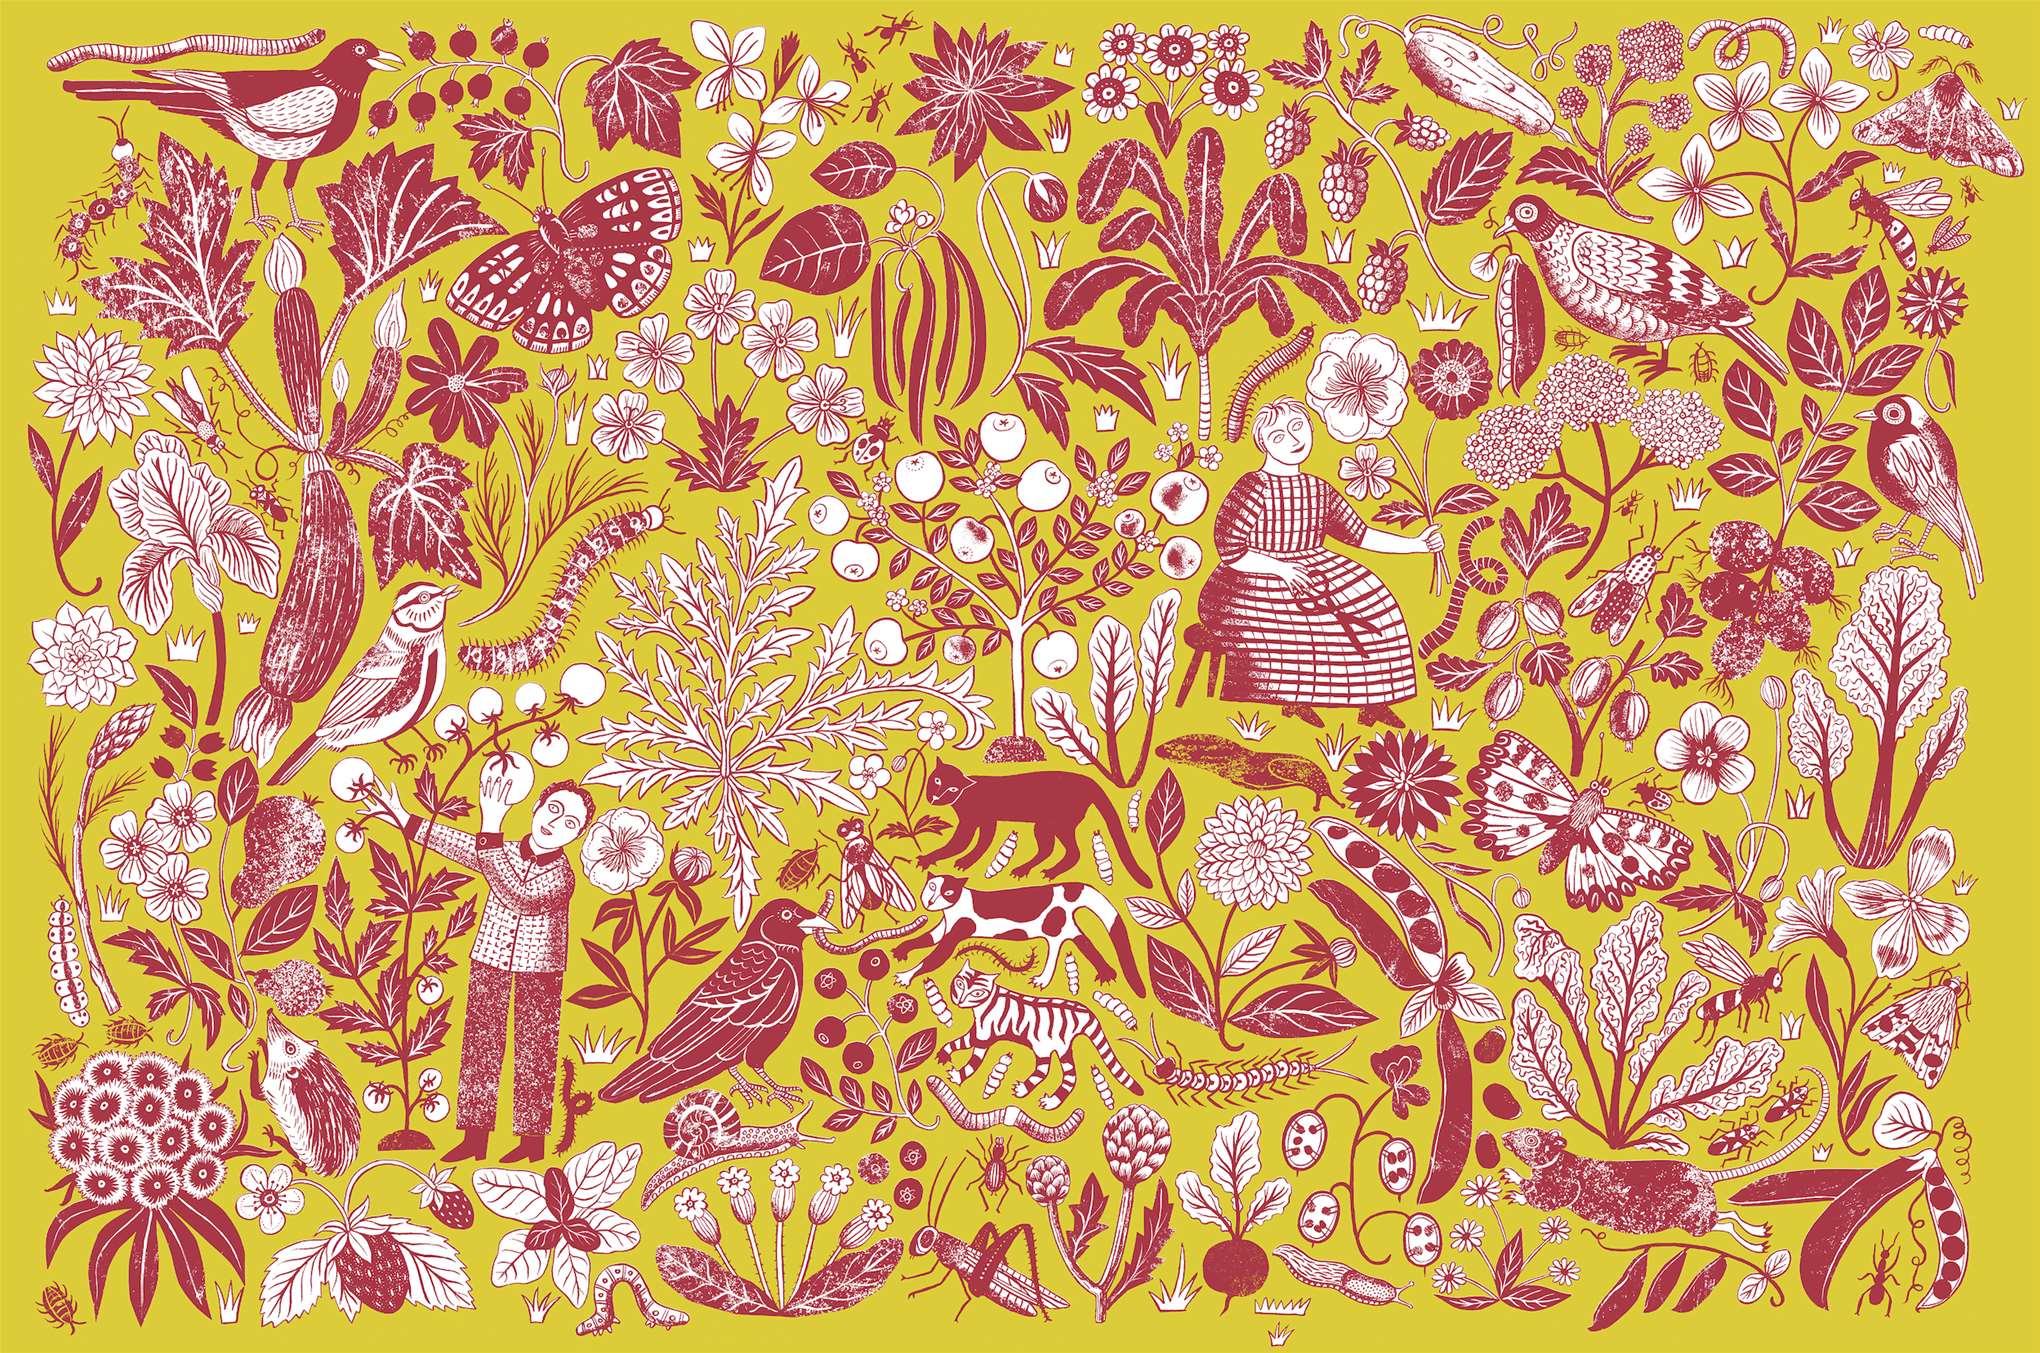 Alice Pattullo, Decorative wallpaper illustration inspired by nature, nostalgia, flora and fauna and childhood memories. <br>